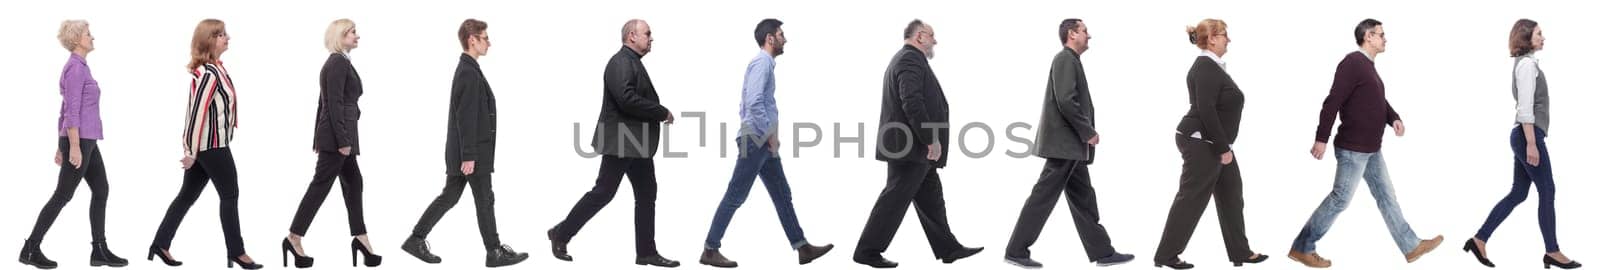 group of successful business people in motion isolated on white background